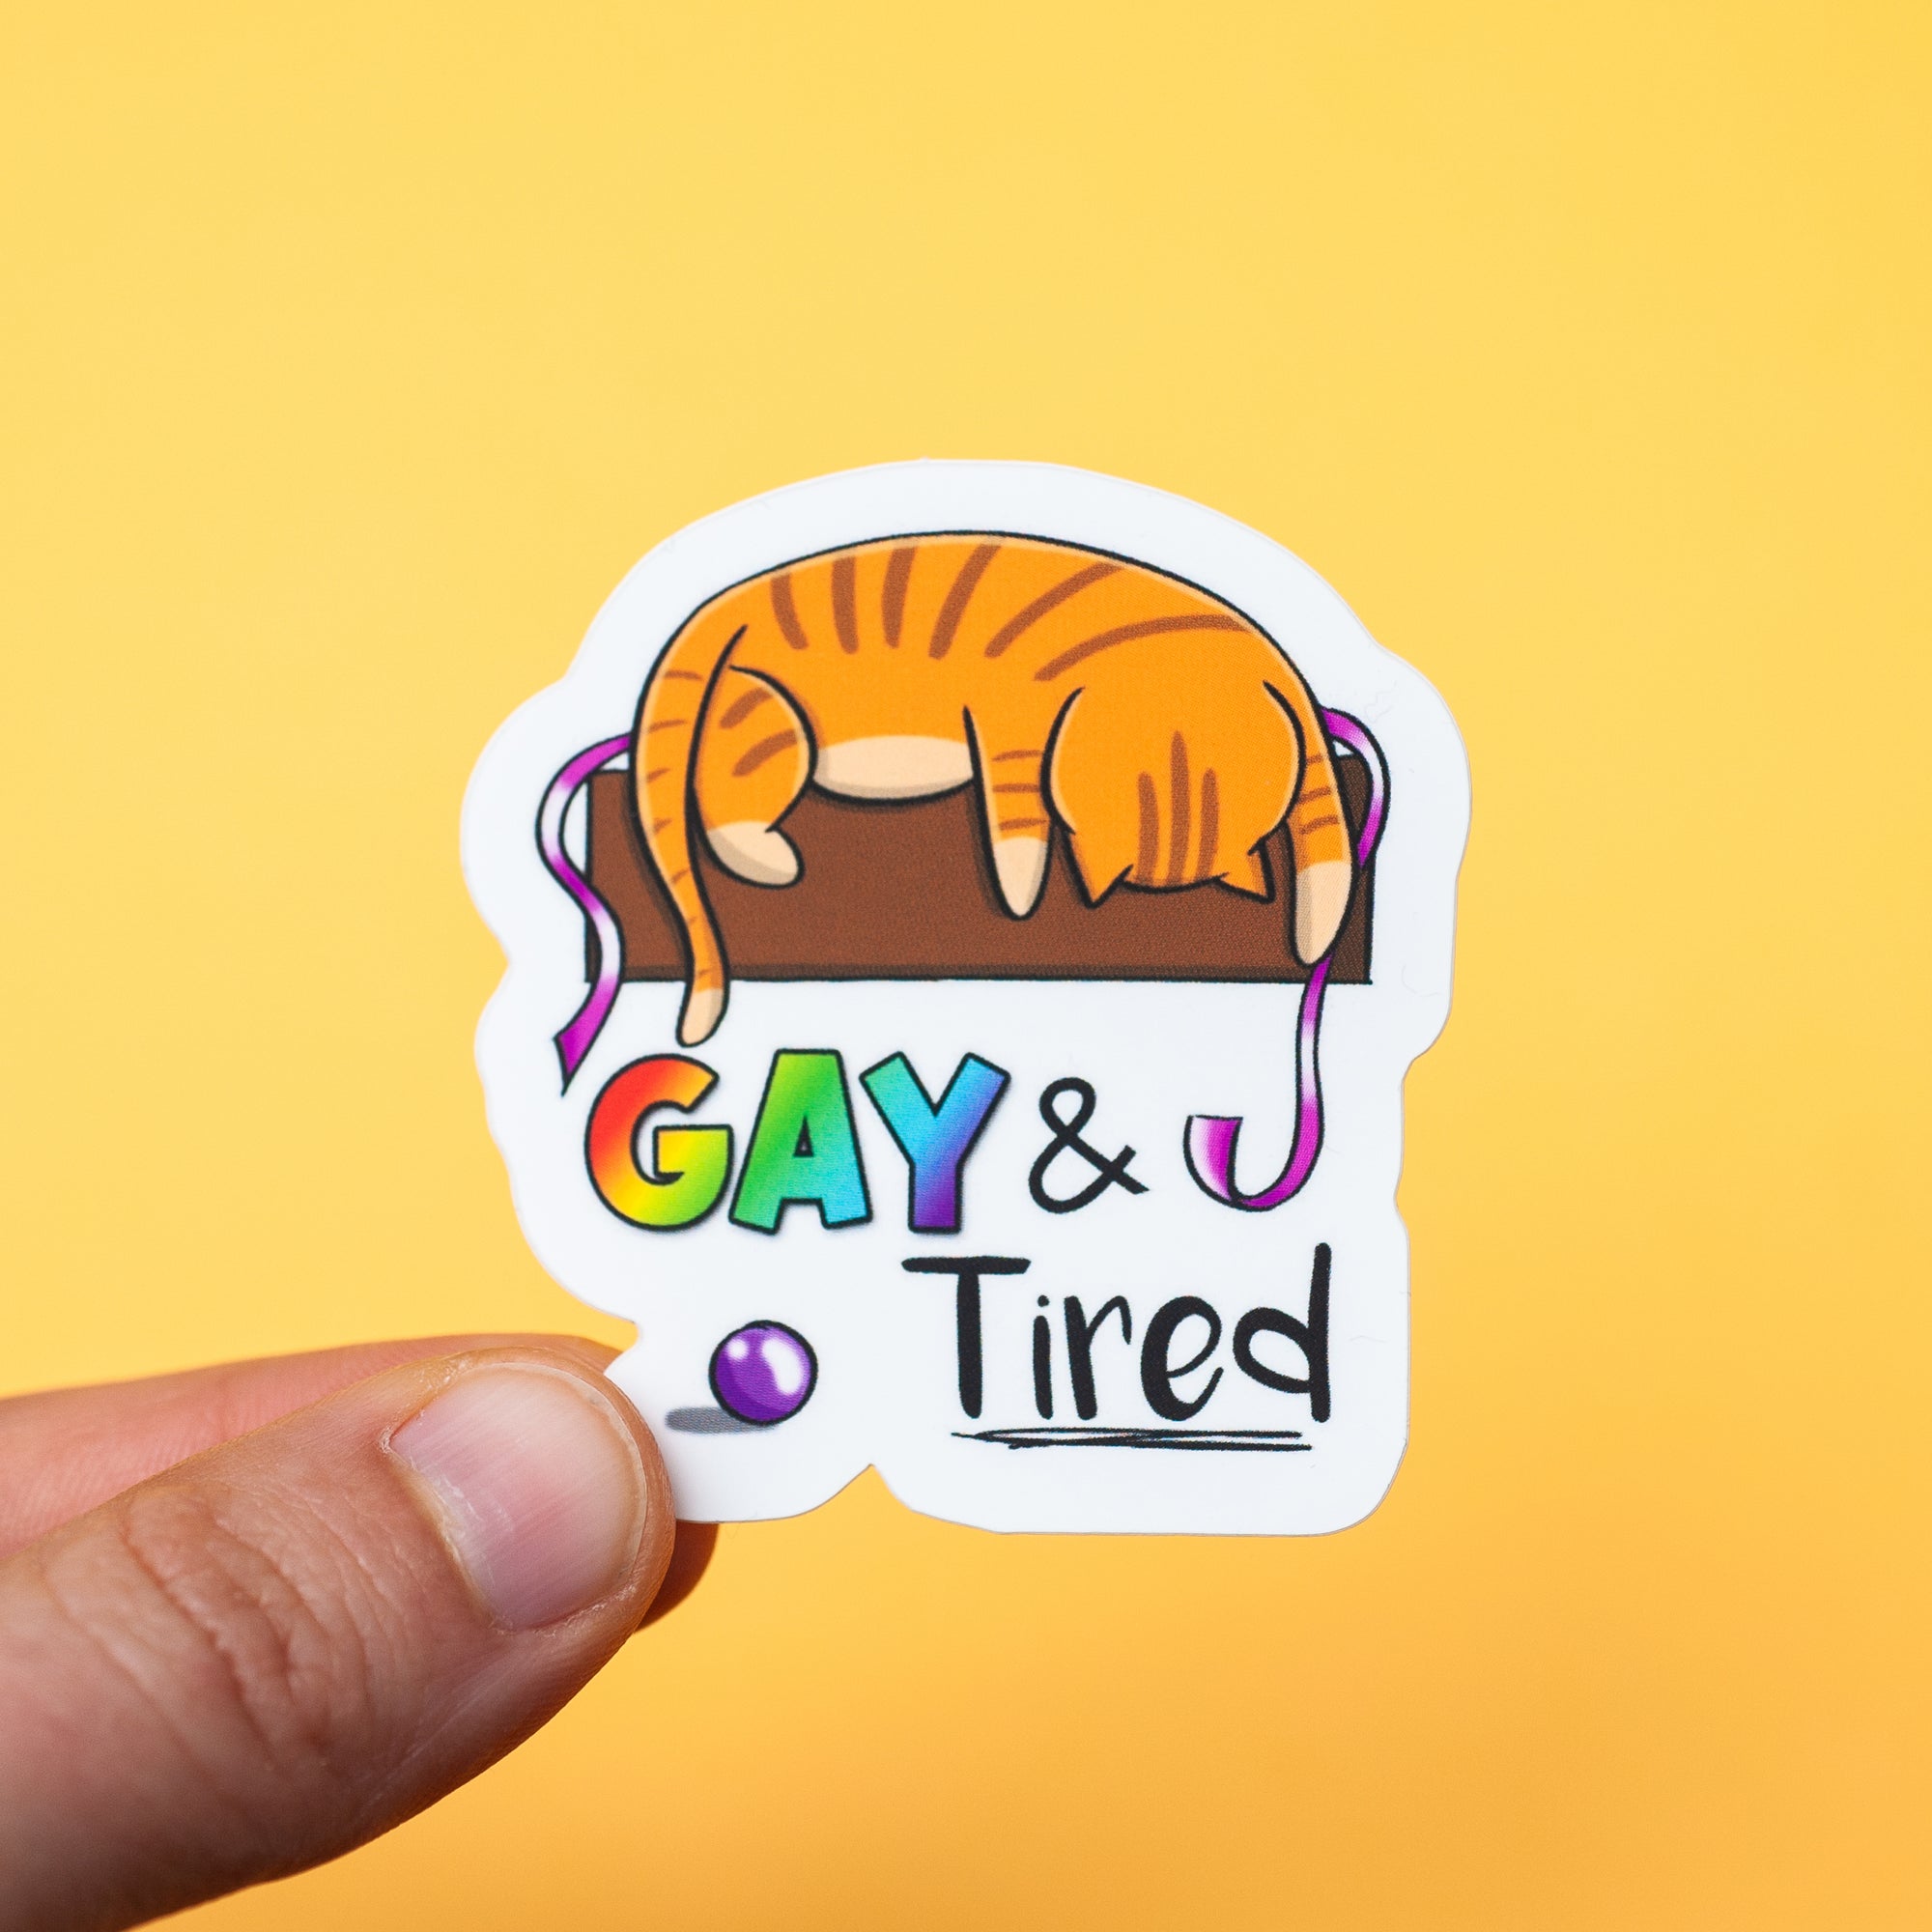 An orange tabby cat folded over a table, looking asleep, with a ball down on the floor & the text "gay & tired"